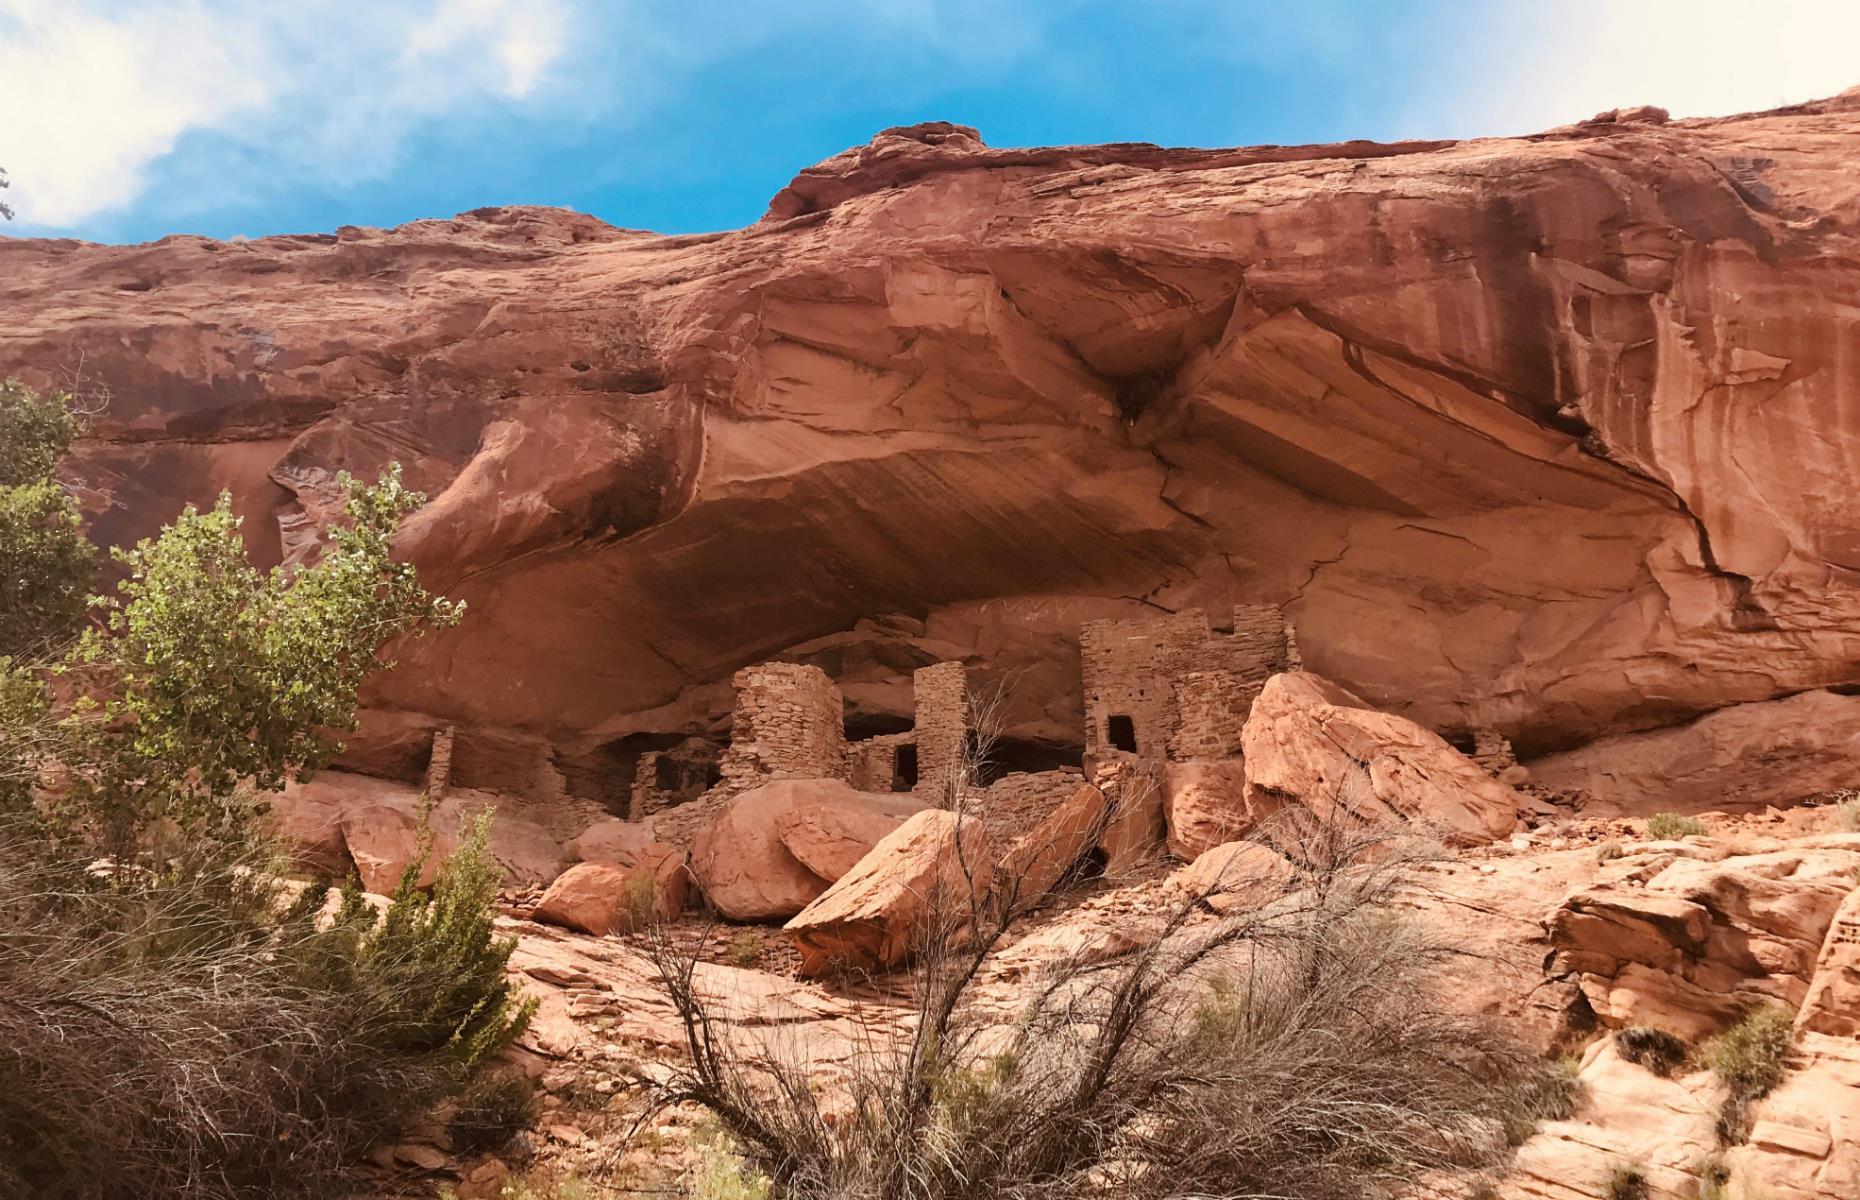 <p>We have the ancient Puebloans to thank for the myriad cliff dwellings scattered across Utah. Tucked into the rocks at Bears Ears National Monument is the <a href="https://www.heritagedaily.com/2021/04/10-cliff-dwellings-of-the-ancient-pueblos/138512">River House Ruin</a> (pictured), dating to AD 900, which contains the well-preserved remains of two houses and a kiva (a room used by the Puebloans for religious rituals). Similarly, the structures at <a href="https://www.nps.gov/hove/planyourvisit/cutthroat.htm">Cutthroat Castle</a> at Hovenweep National Monument were built between AD 750-1300. You’ll need to take a 4WD part of the way and hike the rest of the way to visit both sites.</p>